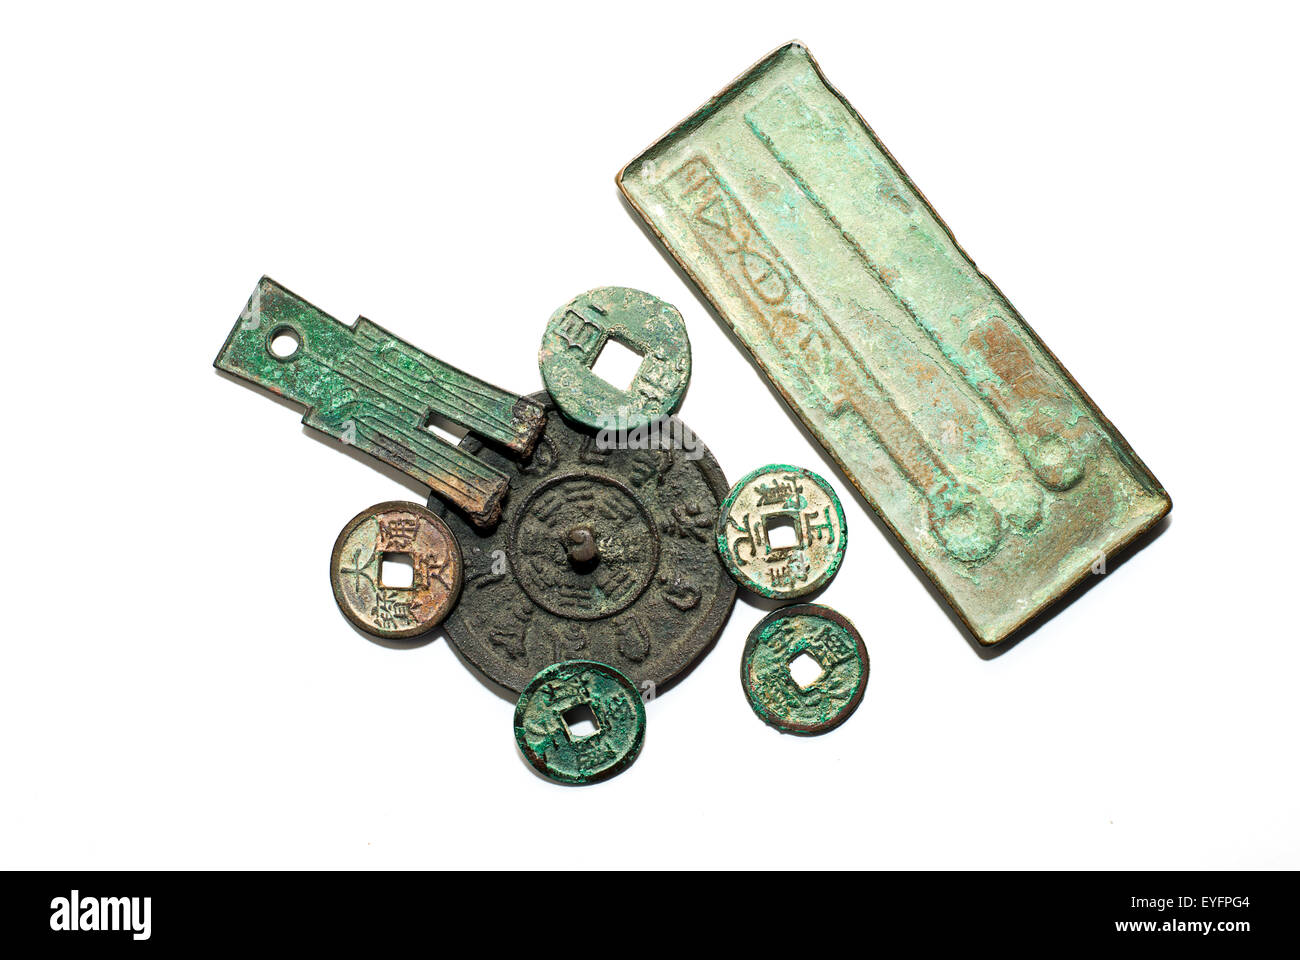 Many Ancient Chinese bronze coins on a white background Stock Photo